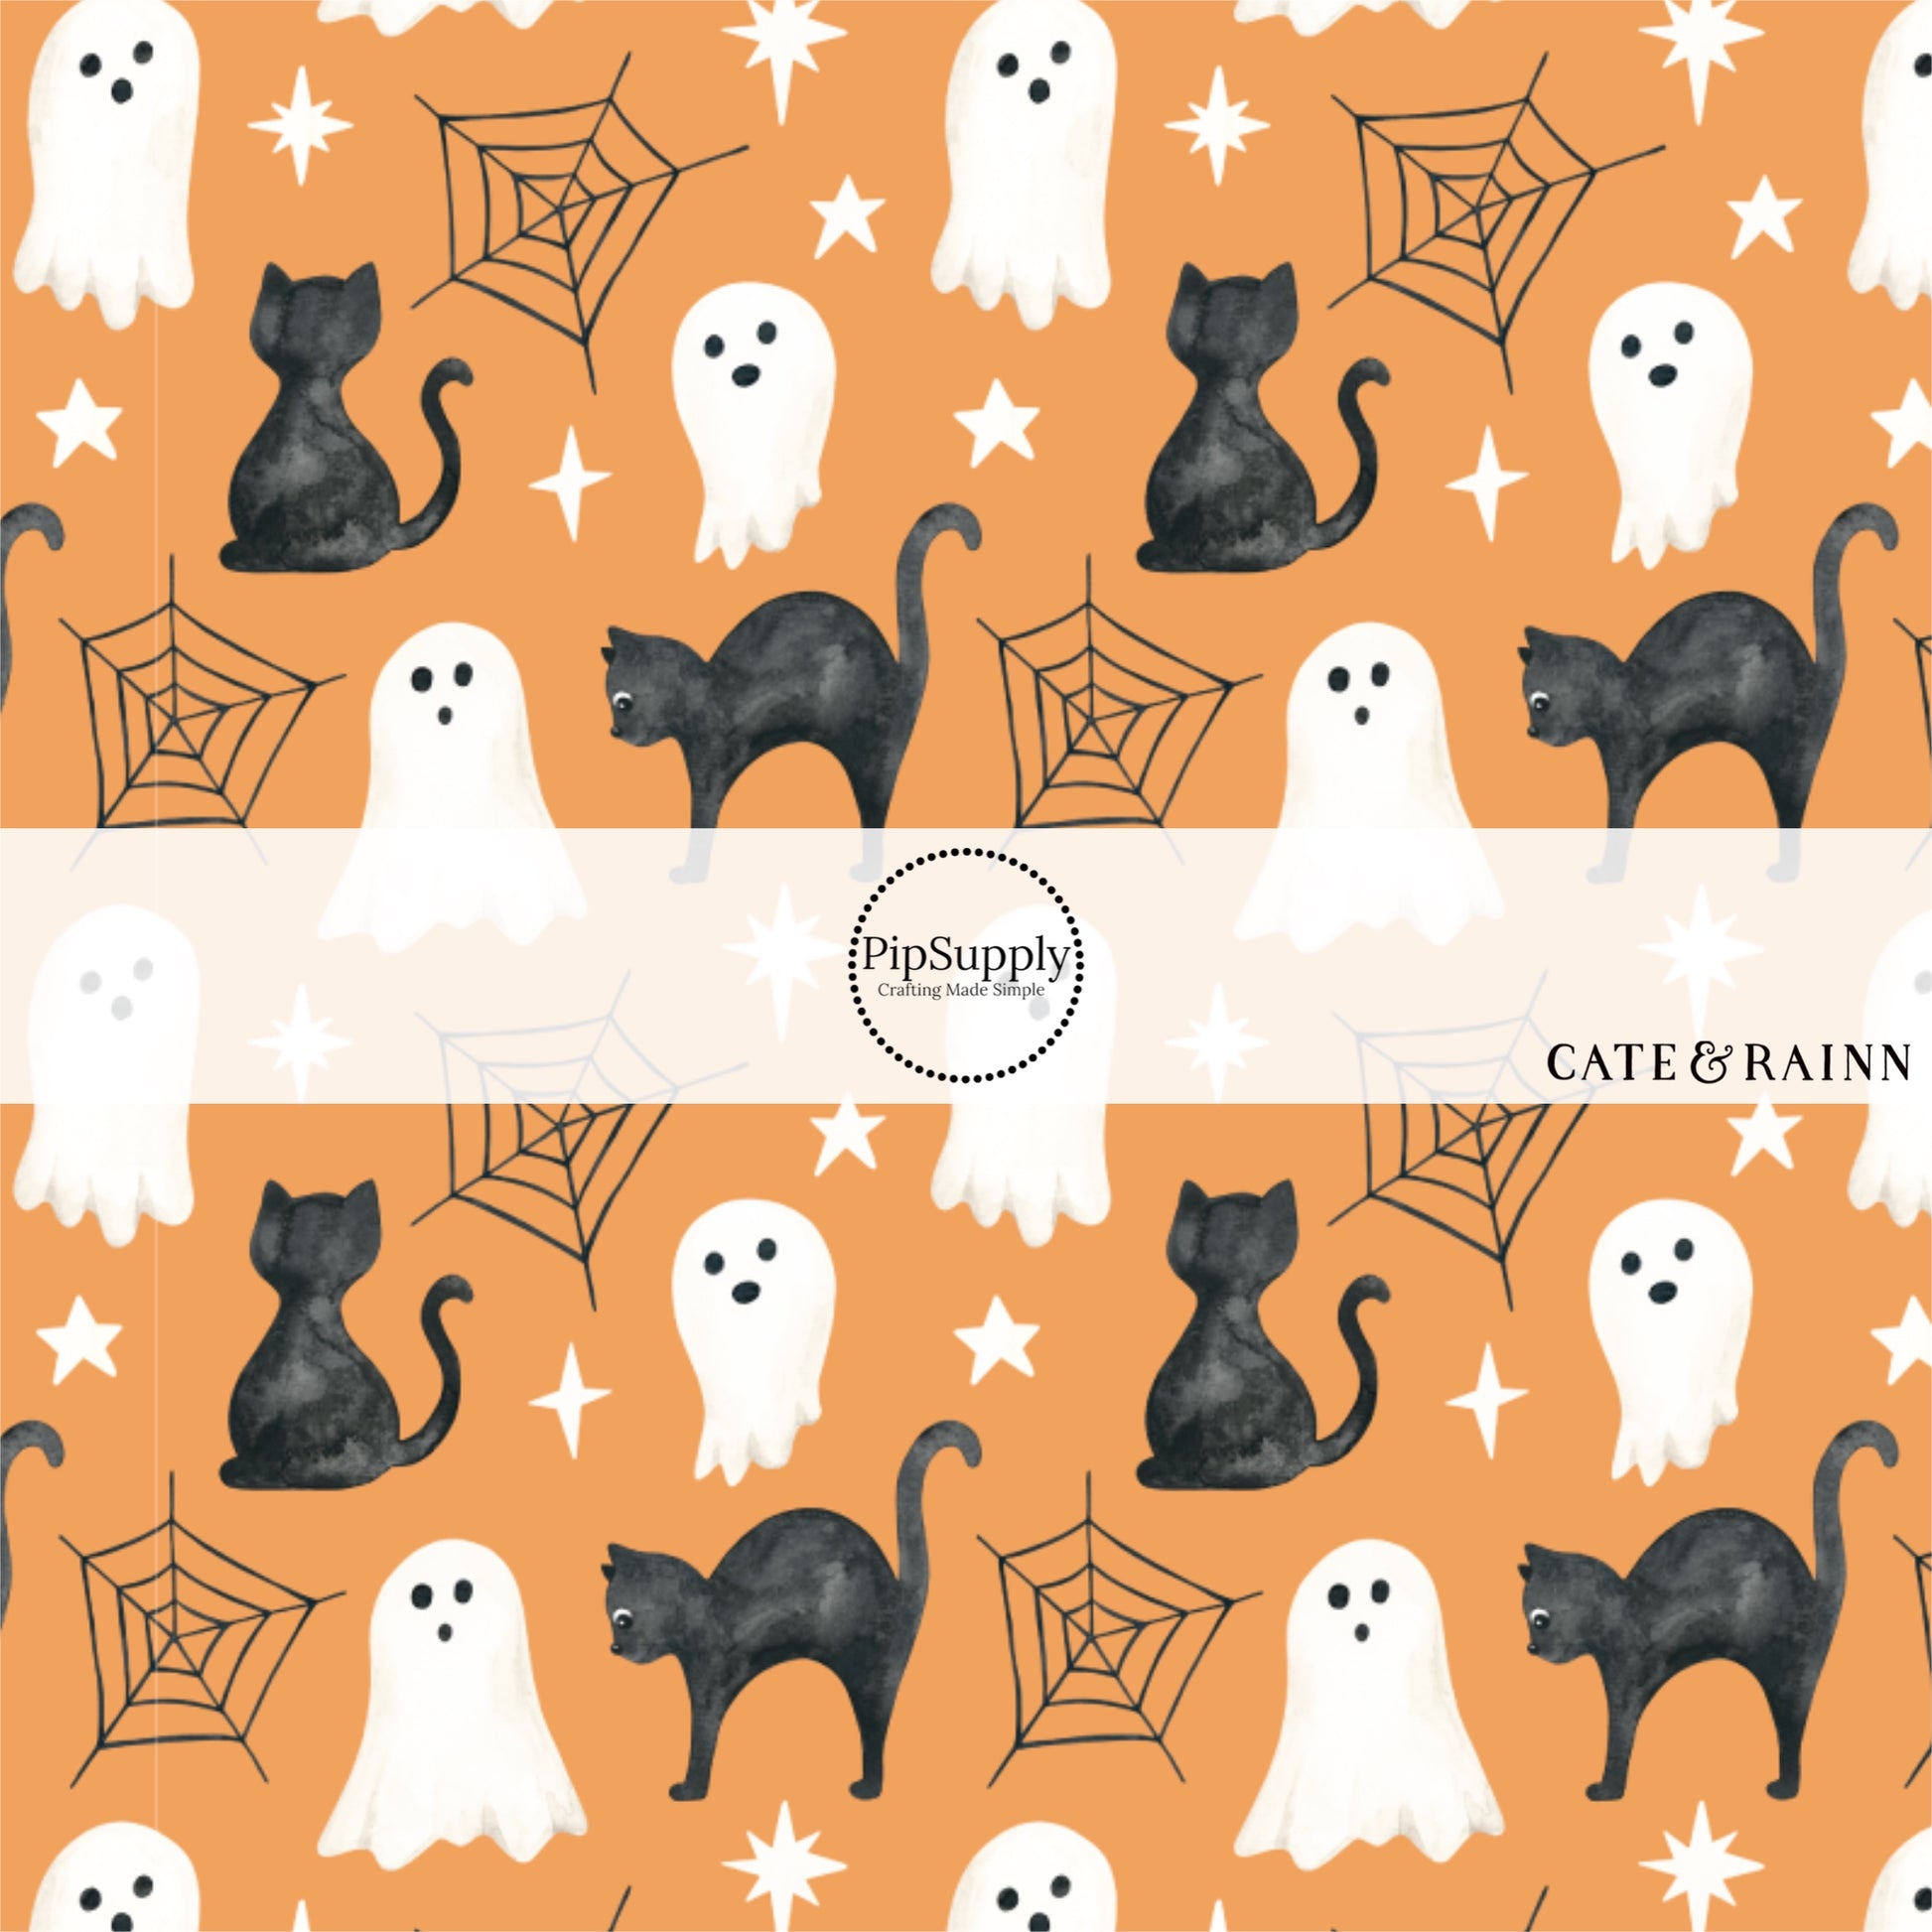 These Halloween themed orange no sew bow strips can be easily tied and attached to a clip for a finished hair bow. These fun spooky bow strips are great for personal use or to sell. The bow stripes features black cats, ghost, spiderwebs, and small white stars on orange.